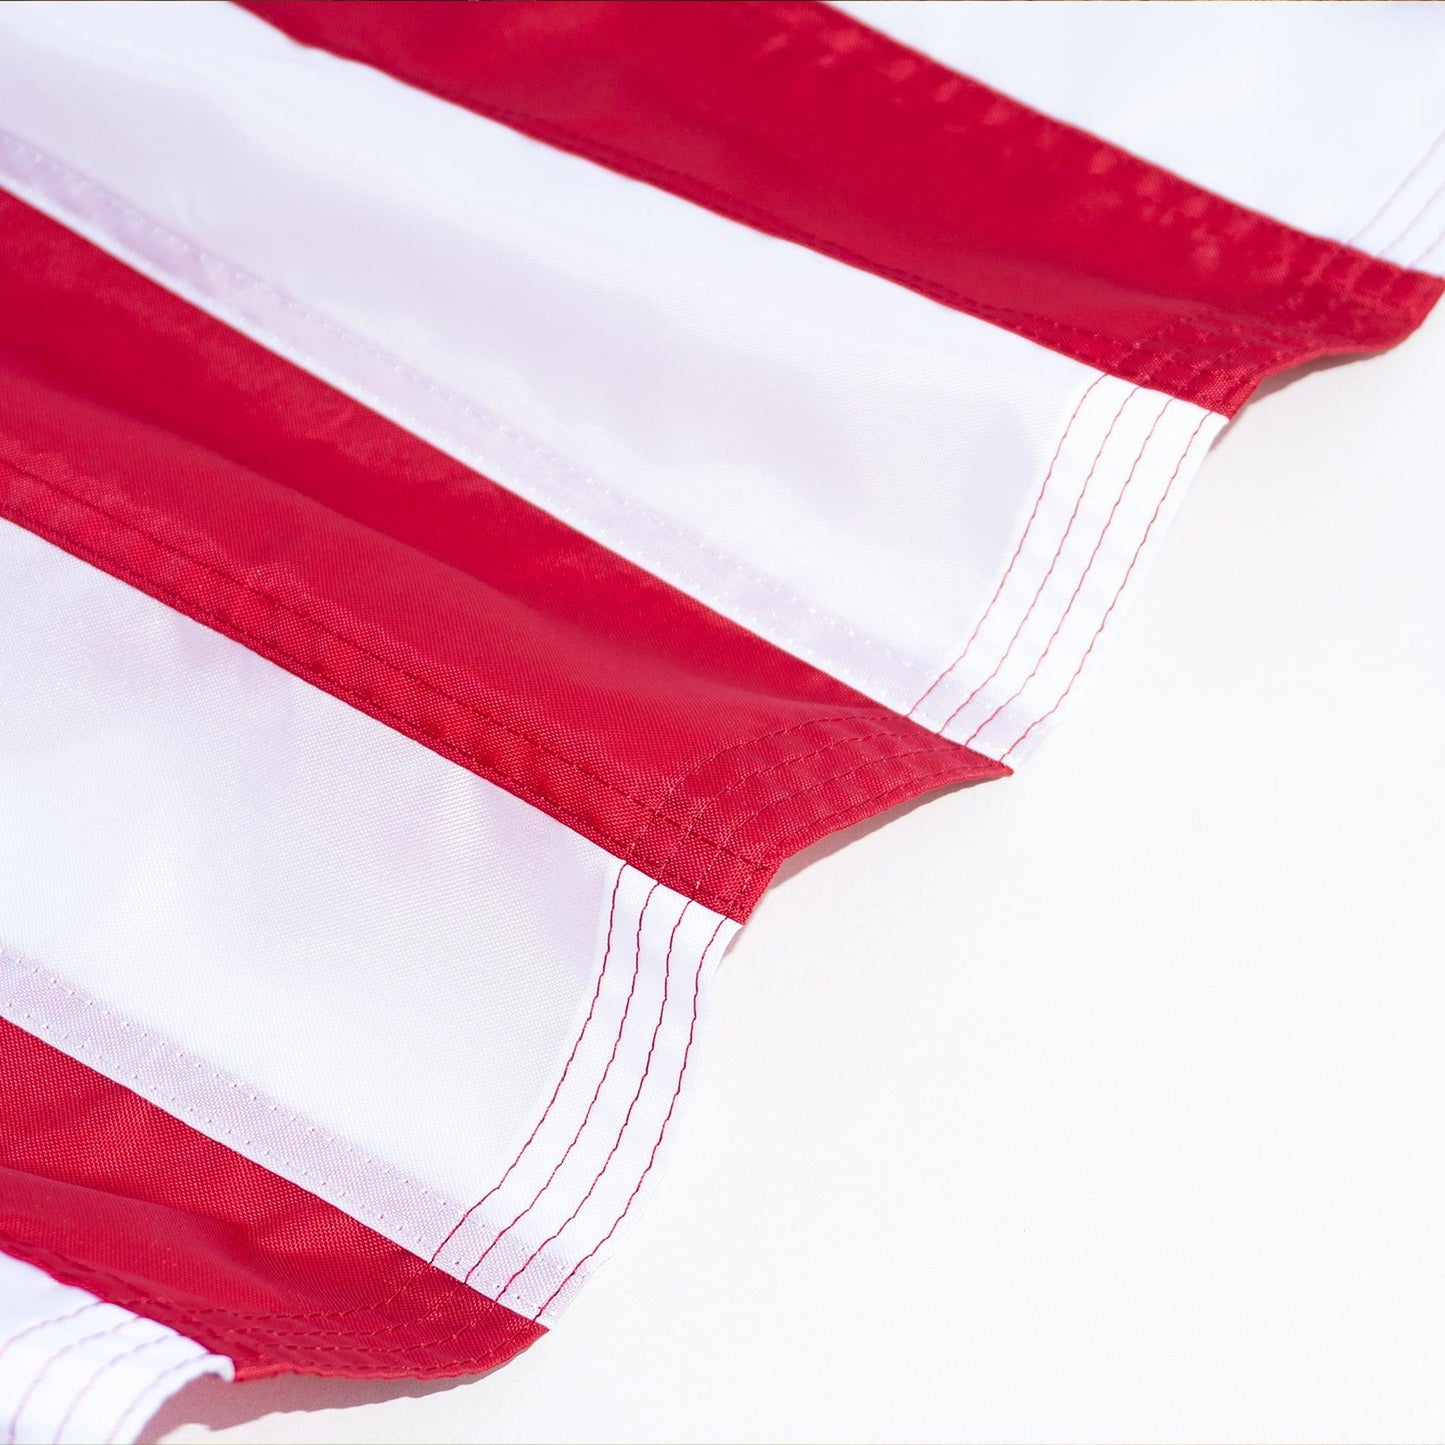 Close-up of a 2.5' X 4' AMERICAN FLAG by The FlagStars featuring red and white horizontal stripes, reminiscent of the American flag and made in USA.